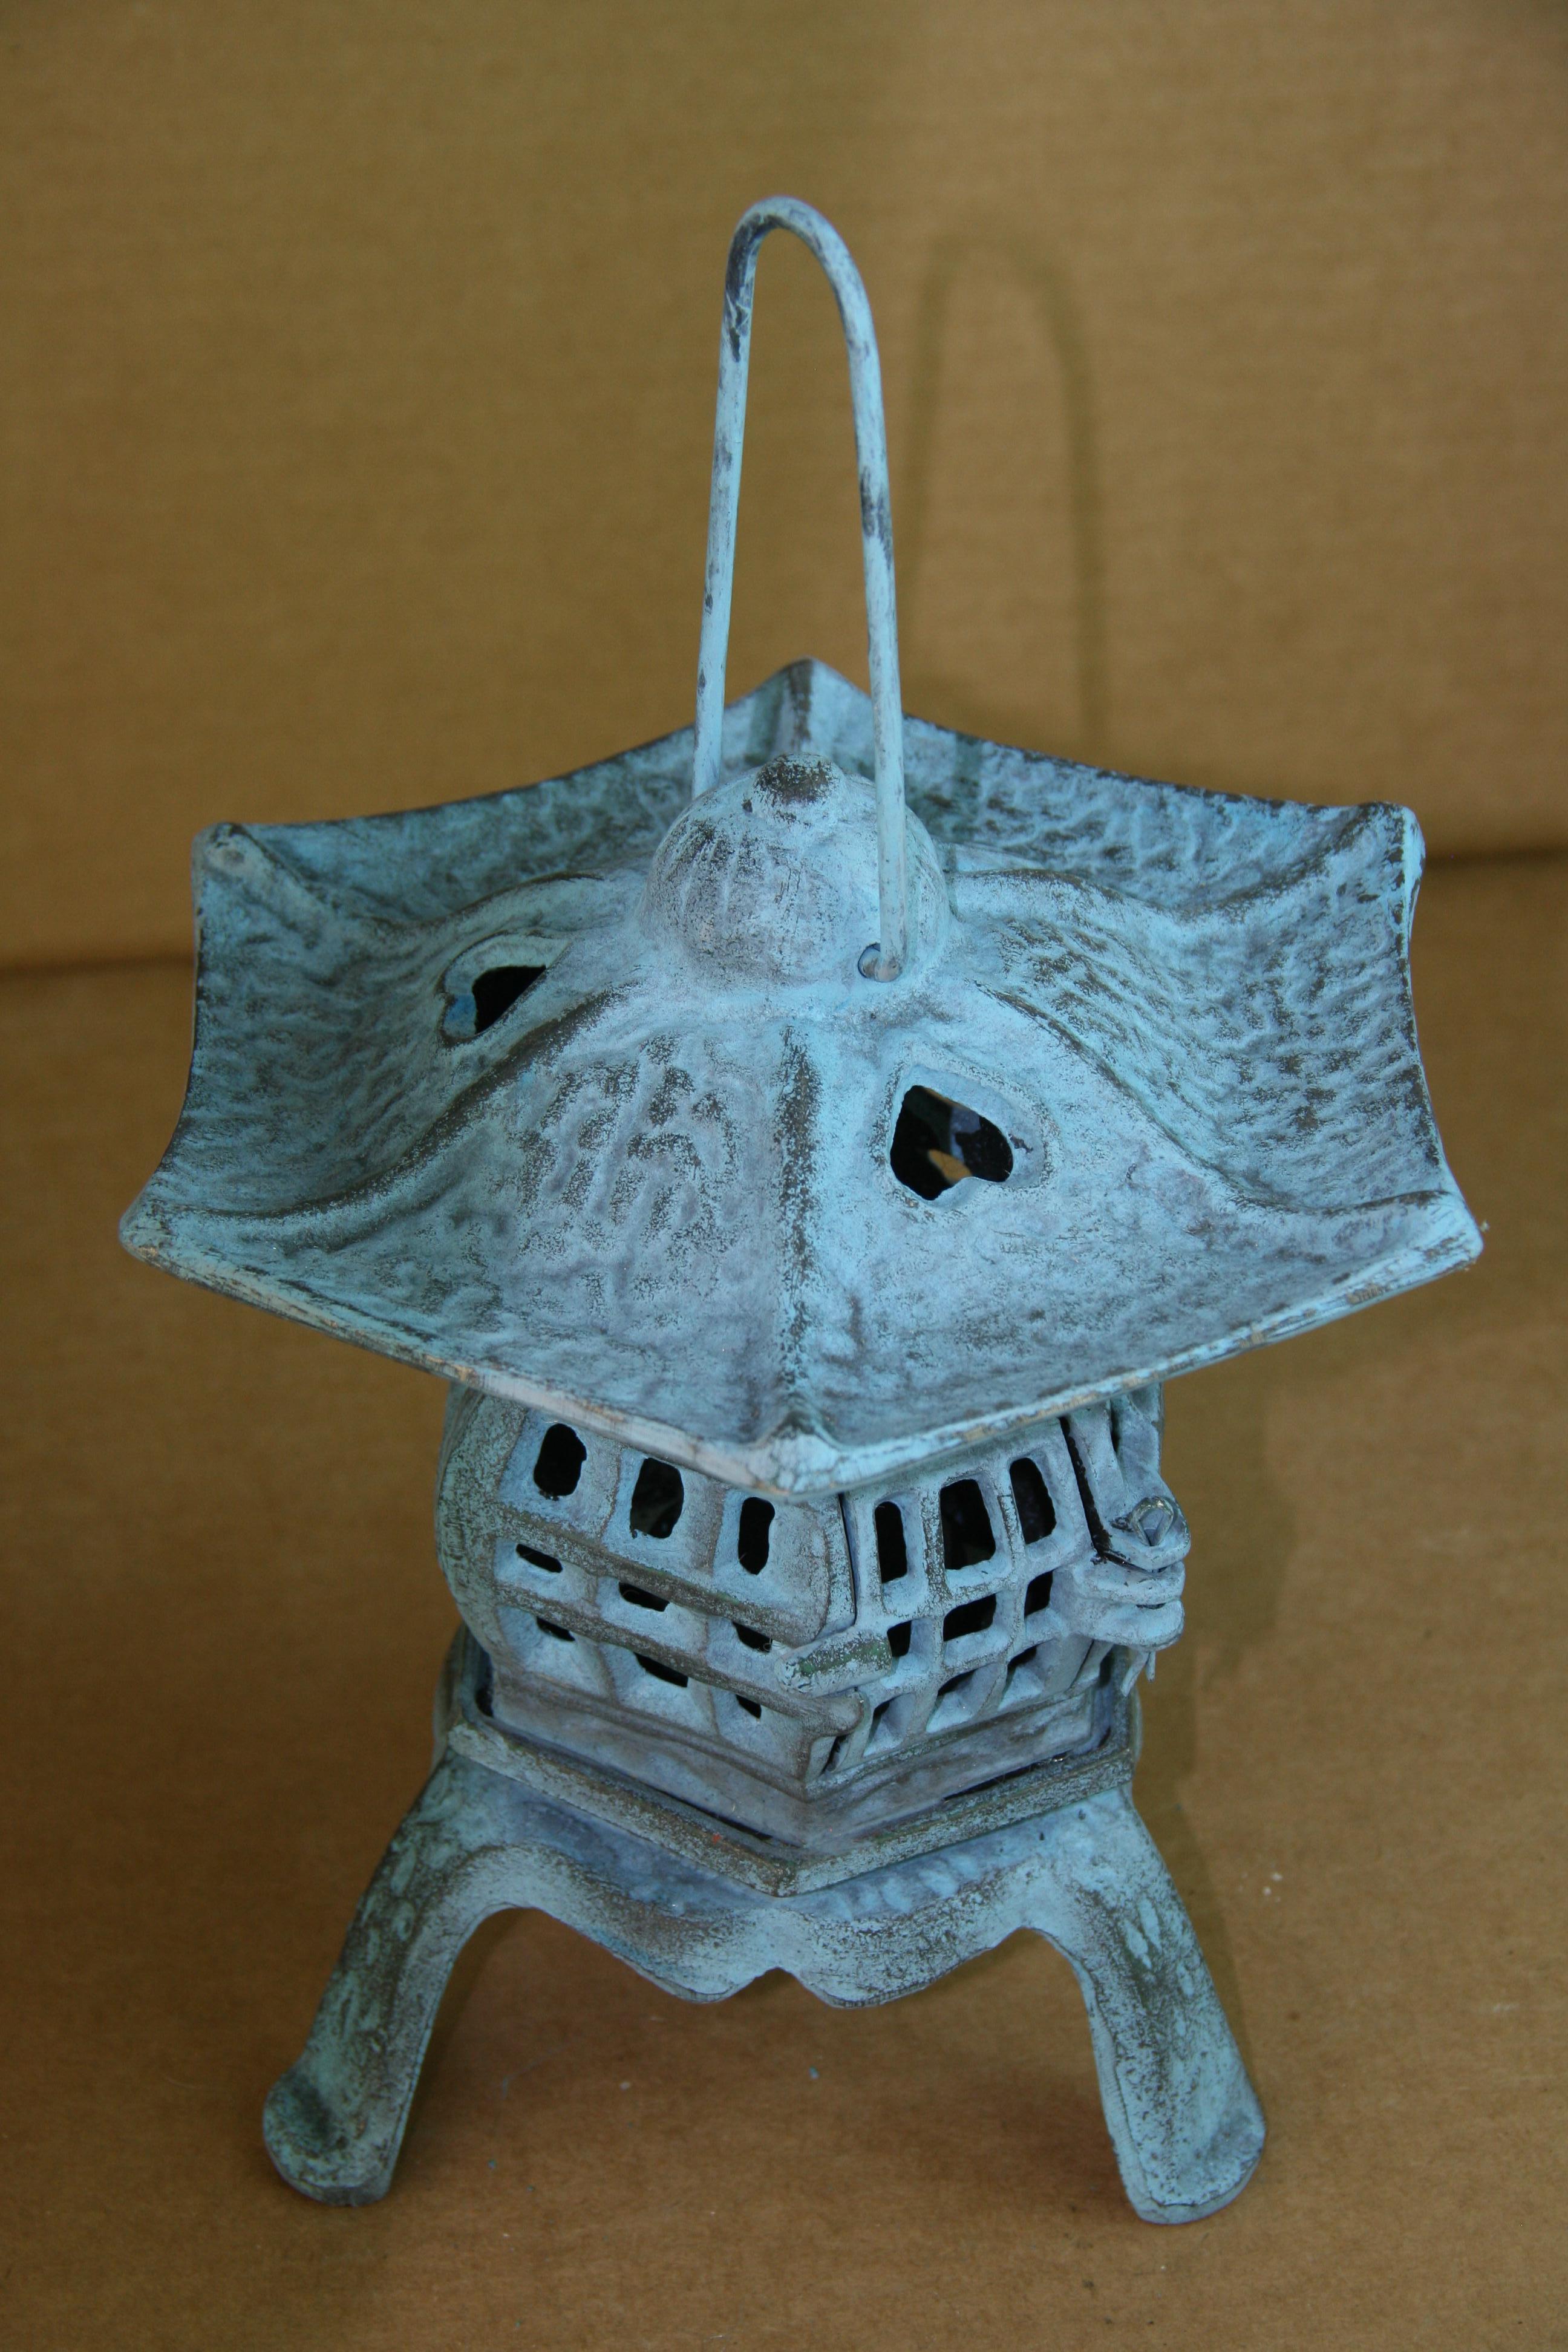 3-724 Hand cast Japanese candle lantern with hearts on top
Height to top of lantern 10